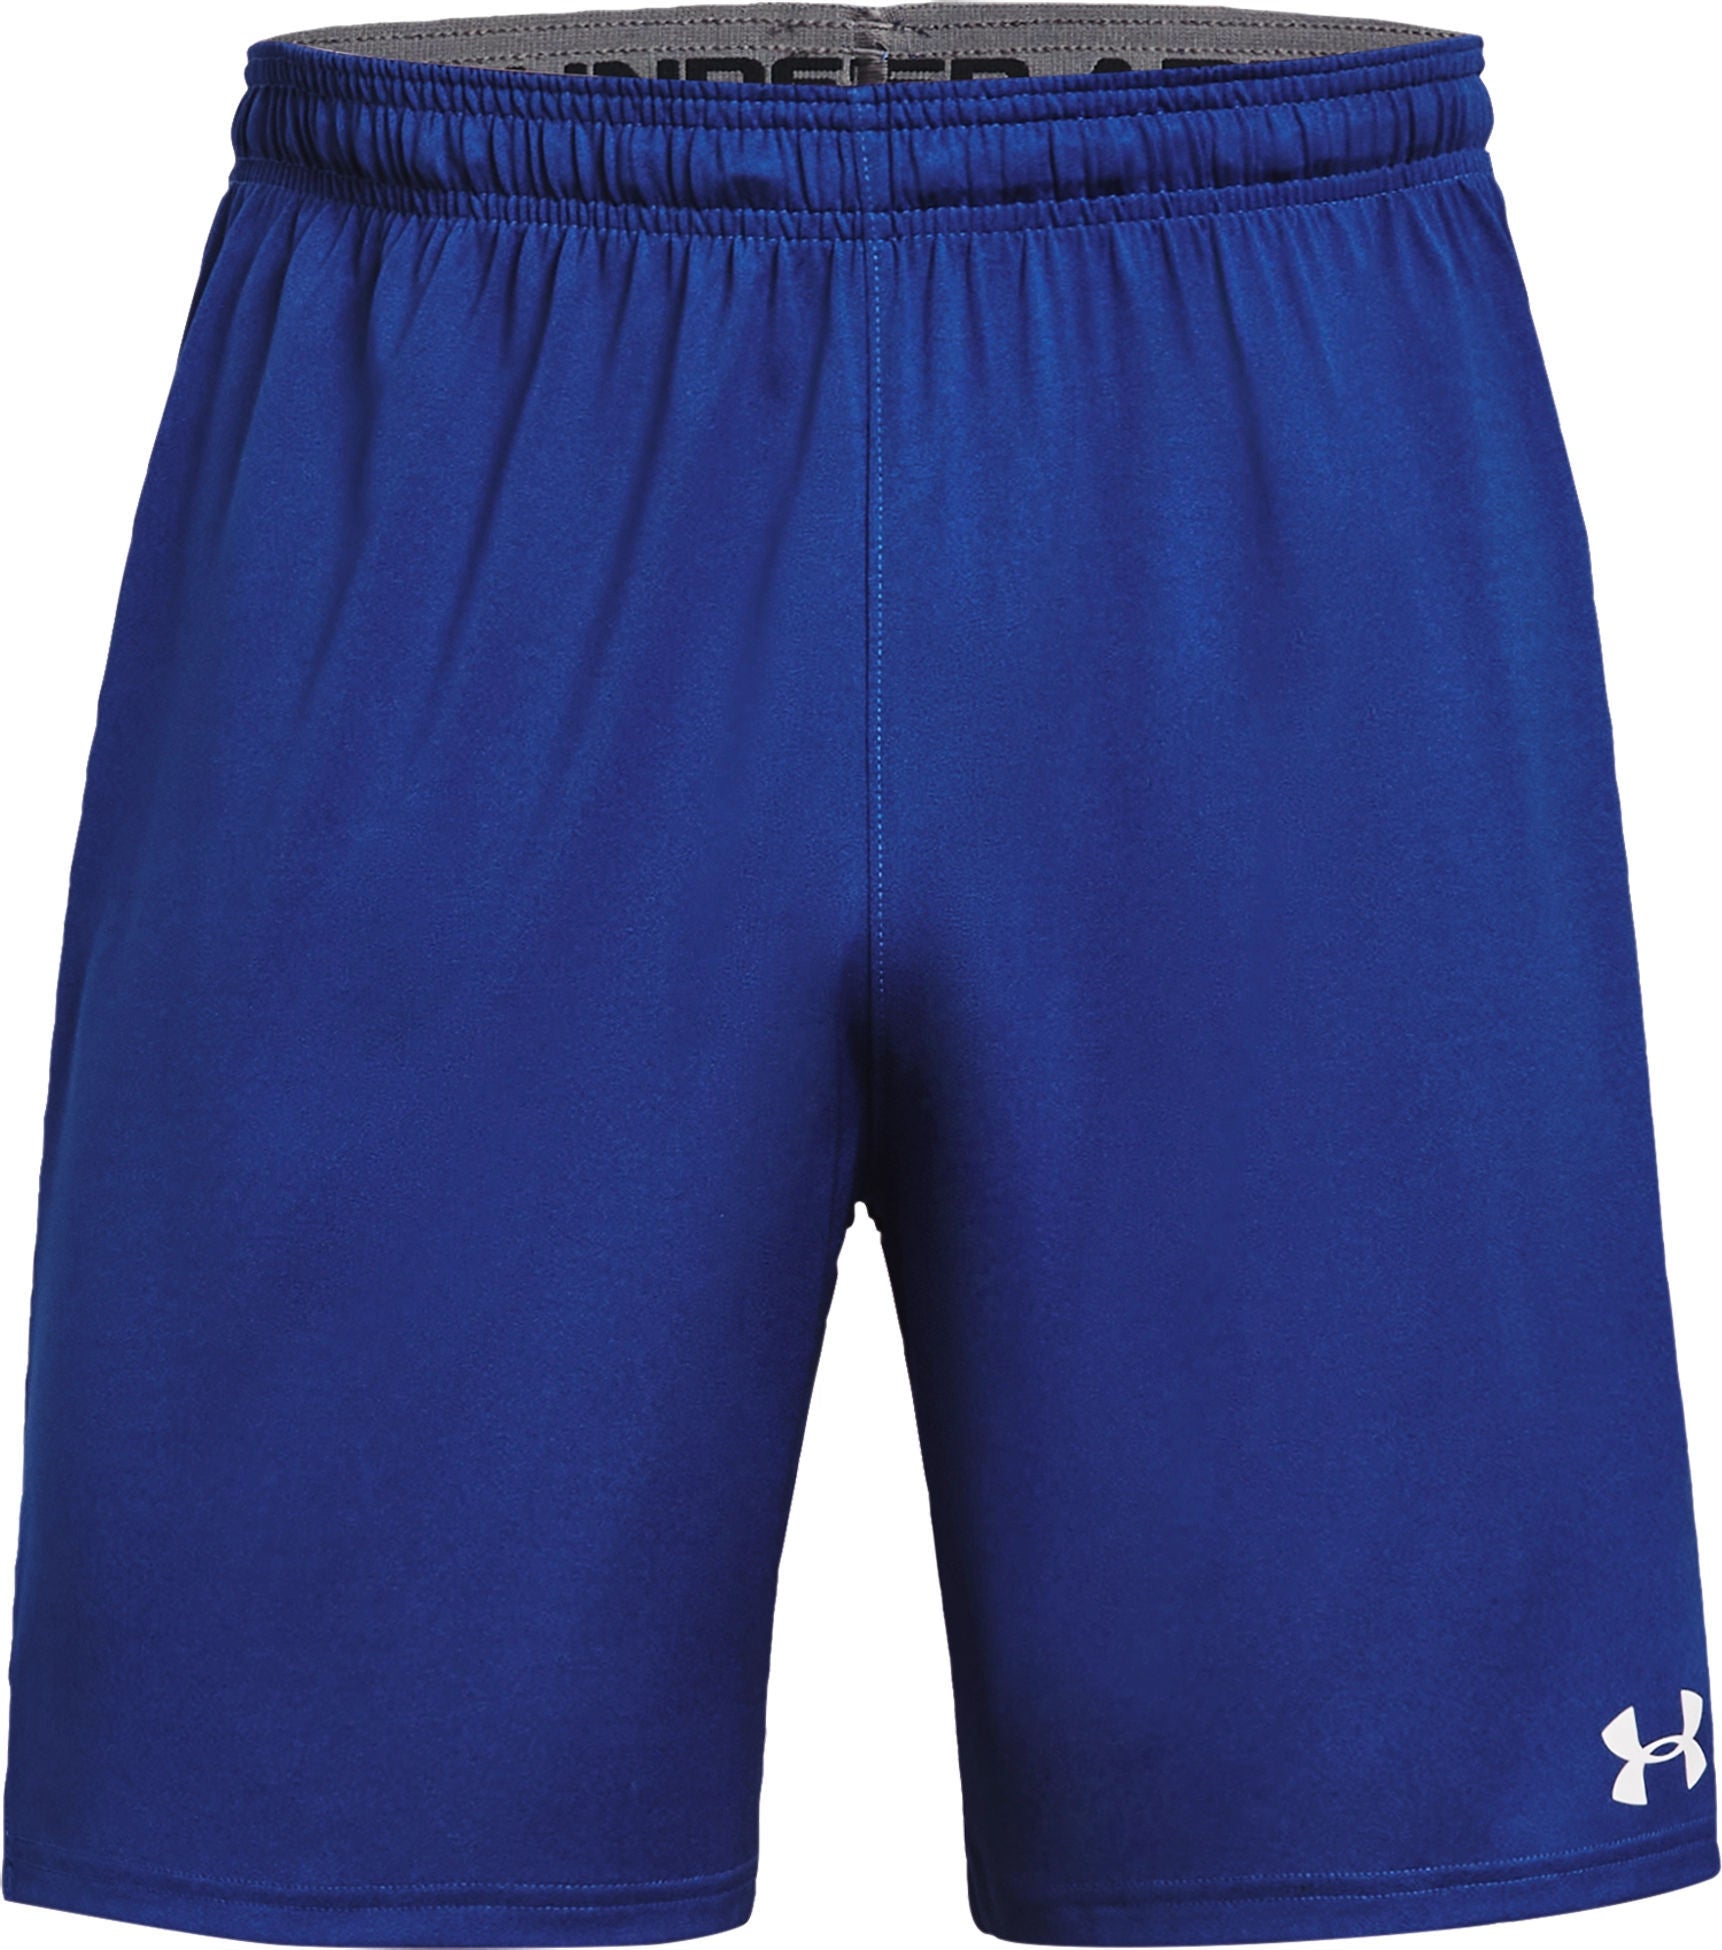 Under Armour Graphic Blue Active T-Shirt Size X-Small (Youth) - 58% off